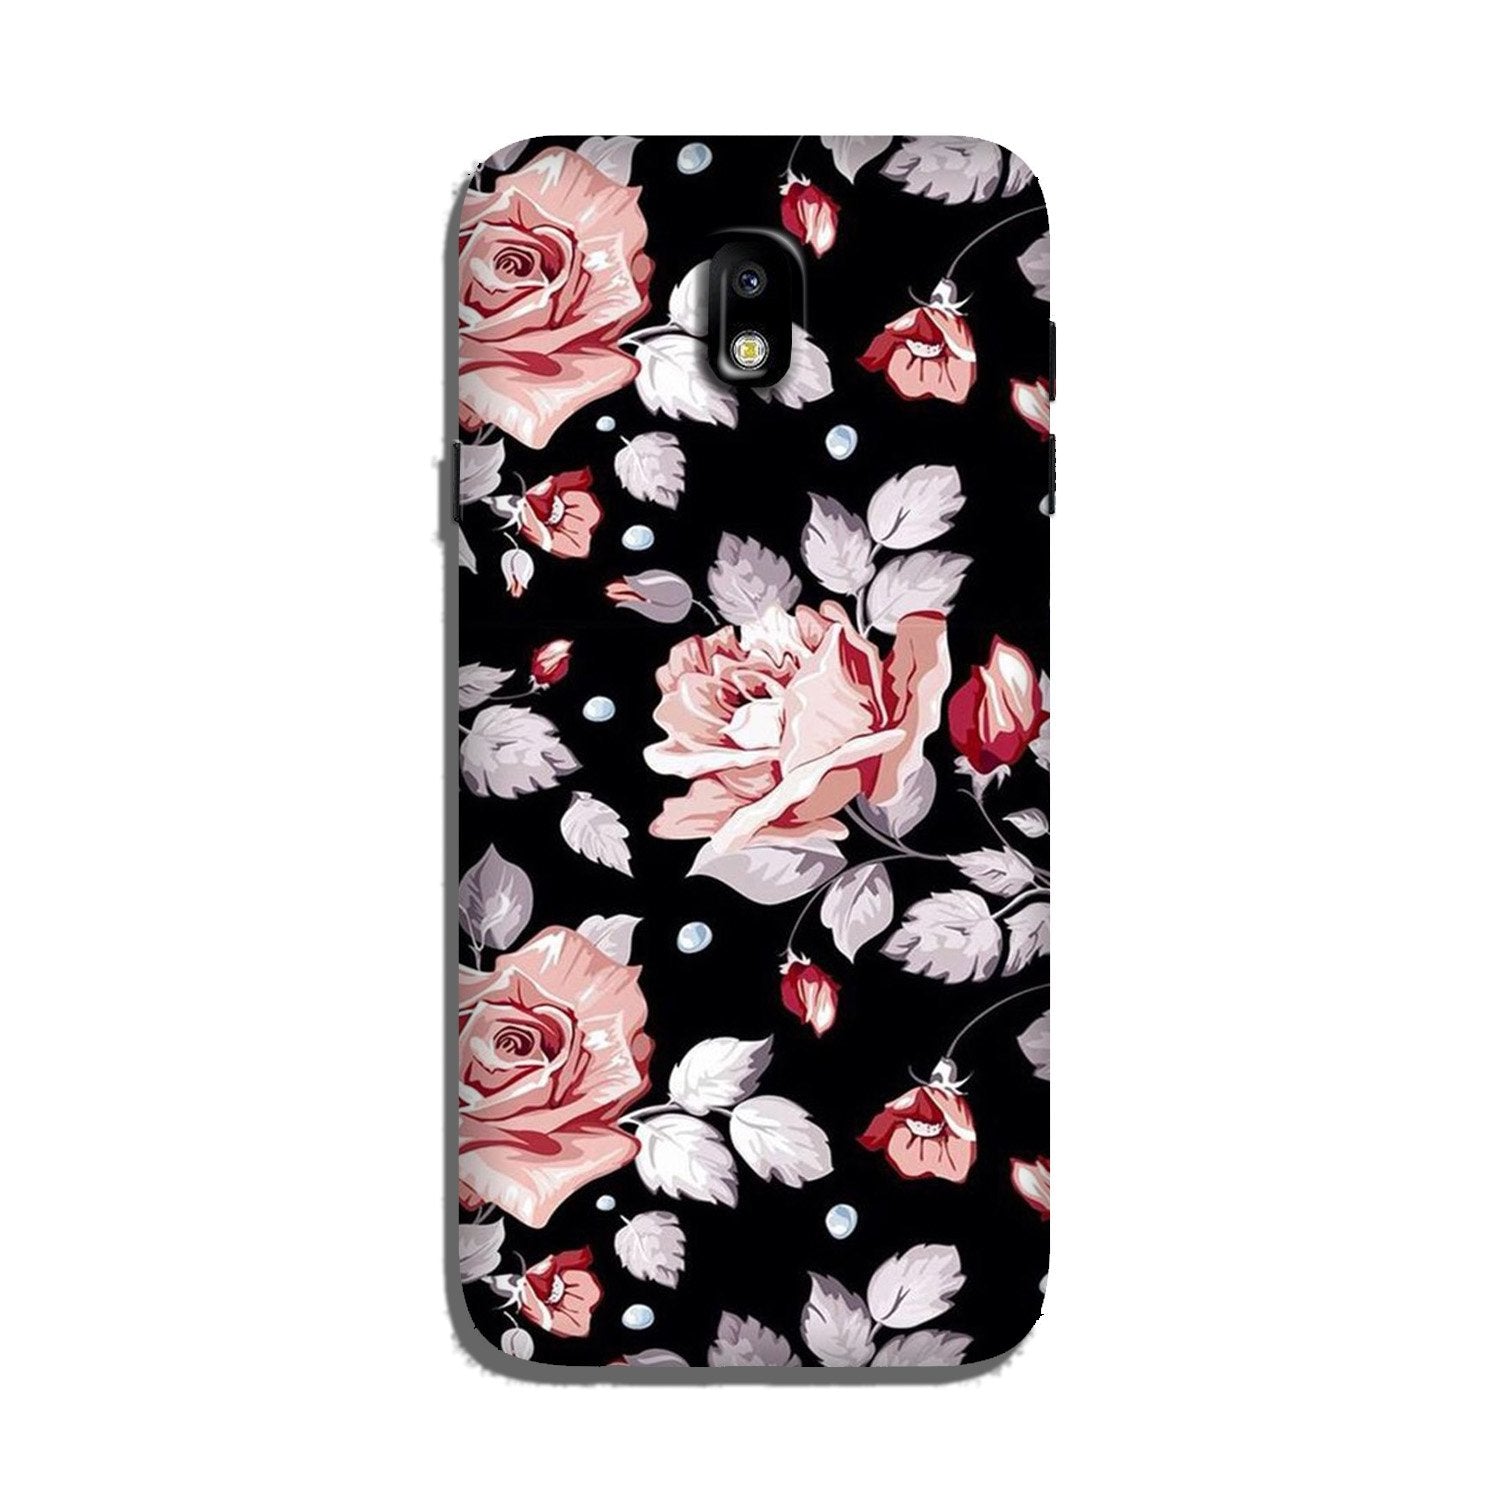 Pink rose Case for Galaxy J5 Pro